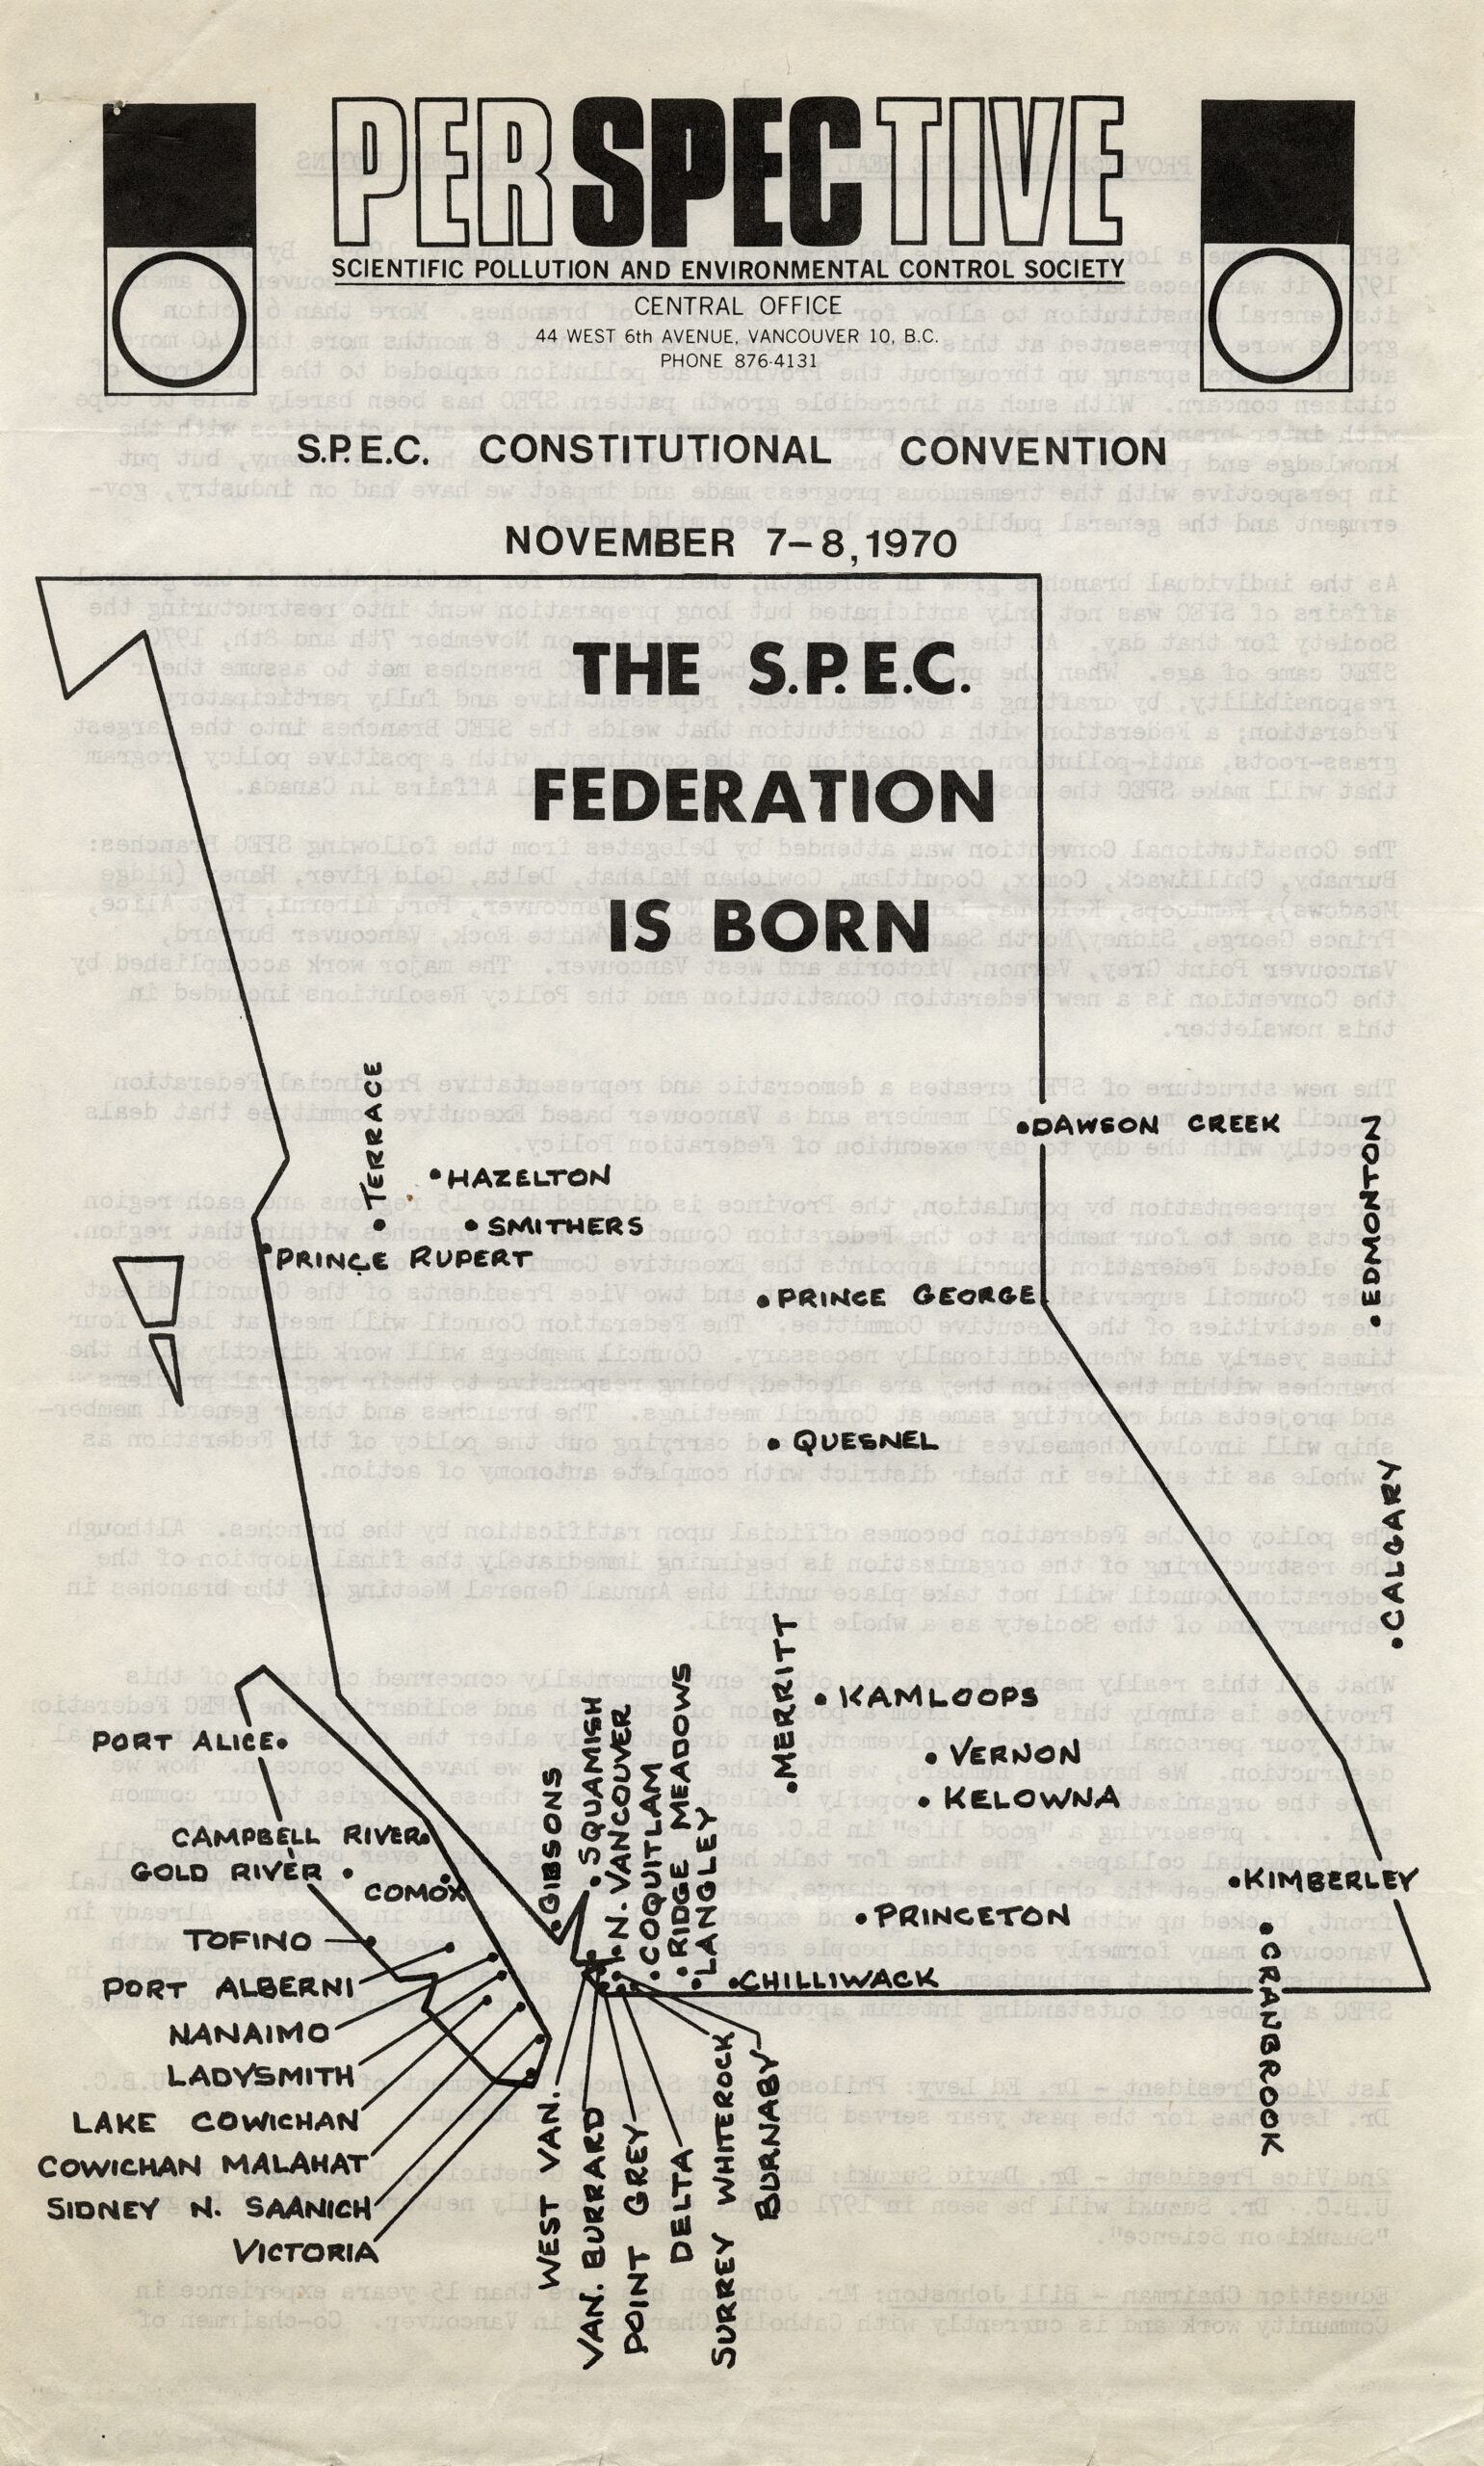 Cover of "Perspective" showing SPEC branches located around the province, 1970. This issue discusses the Constitutional Convention that passed a new governing constitution that included branches. Reference code: AM1556-S7.